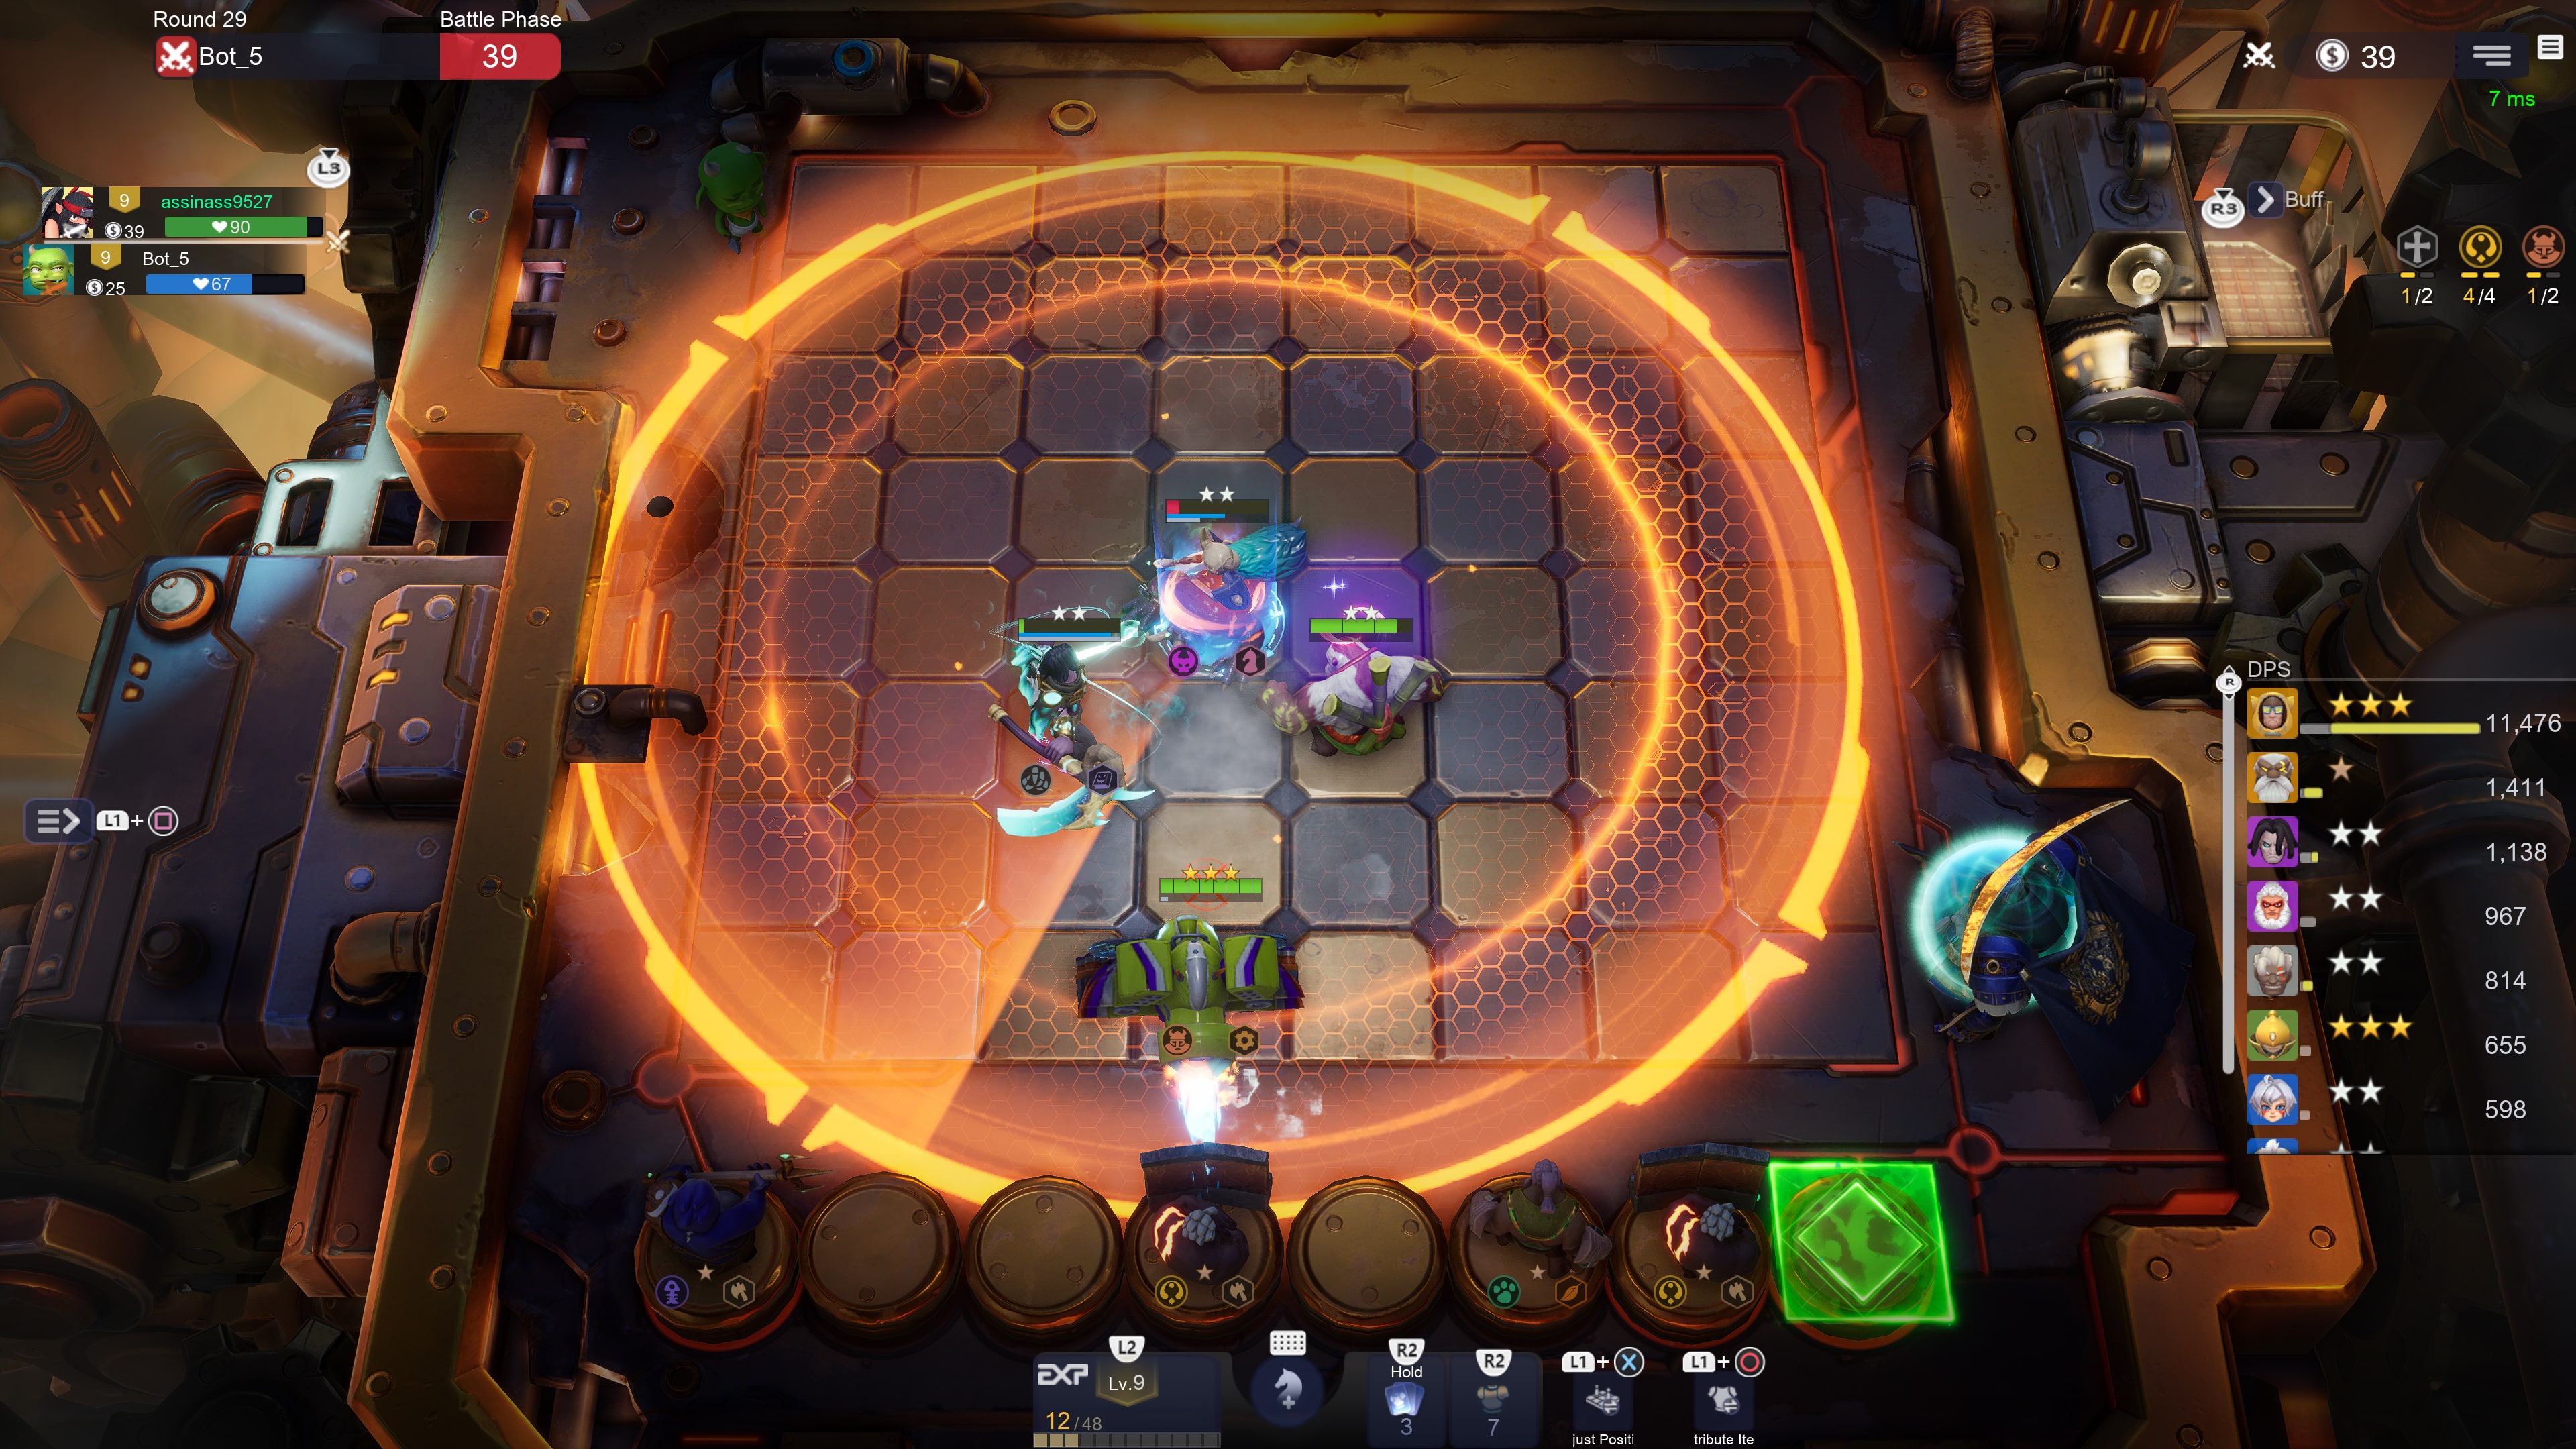 Auto Chess' is coming to PS5 with haptic feedback